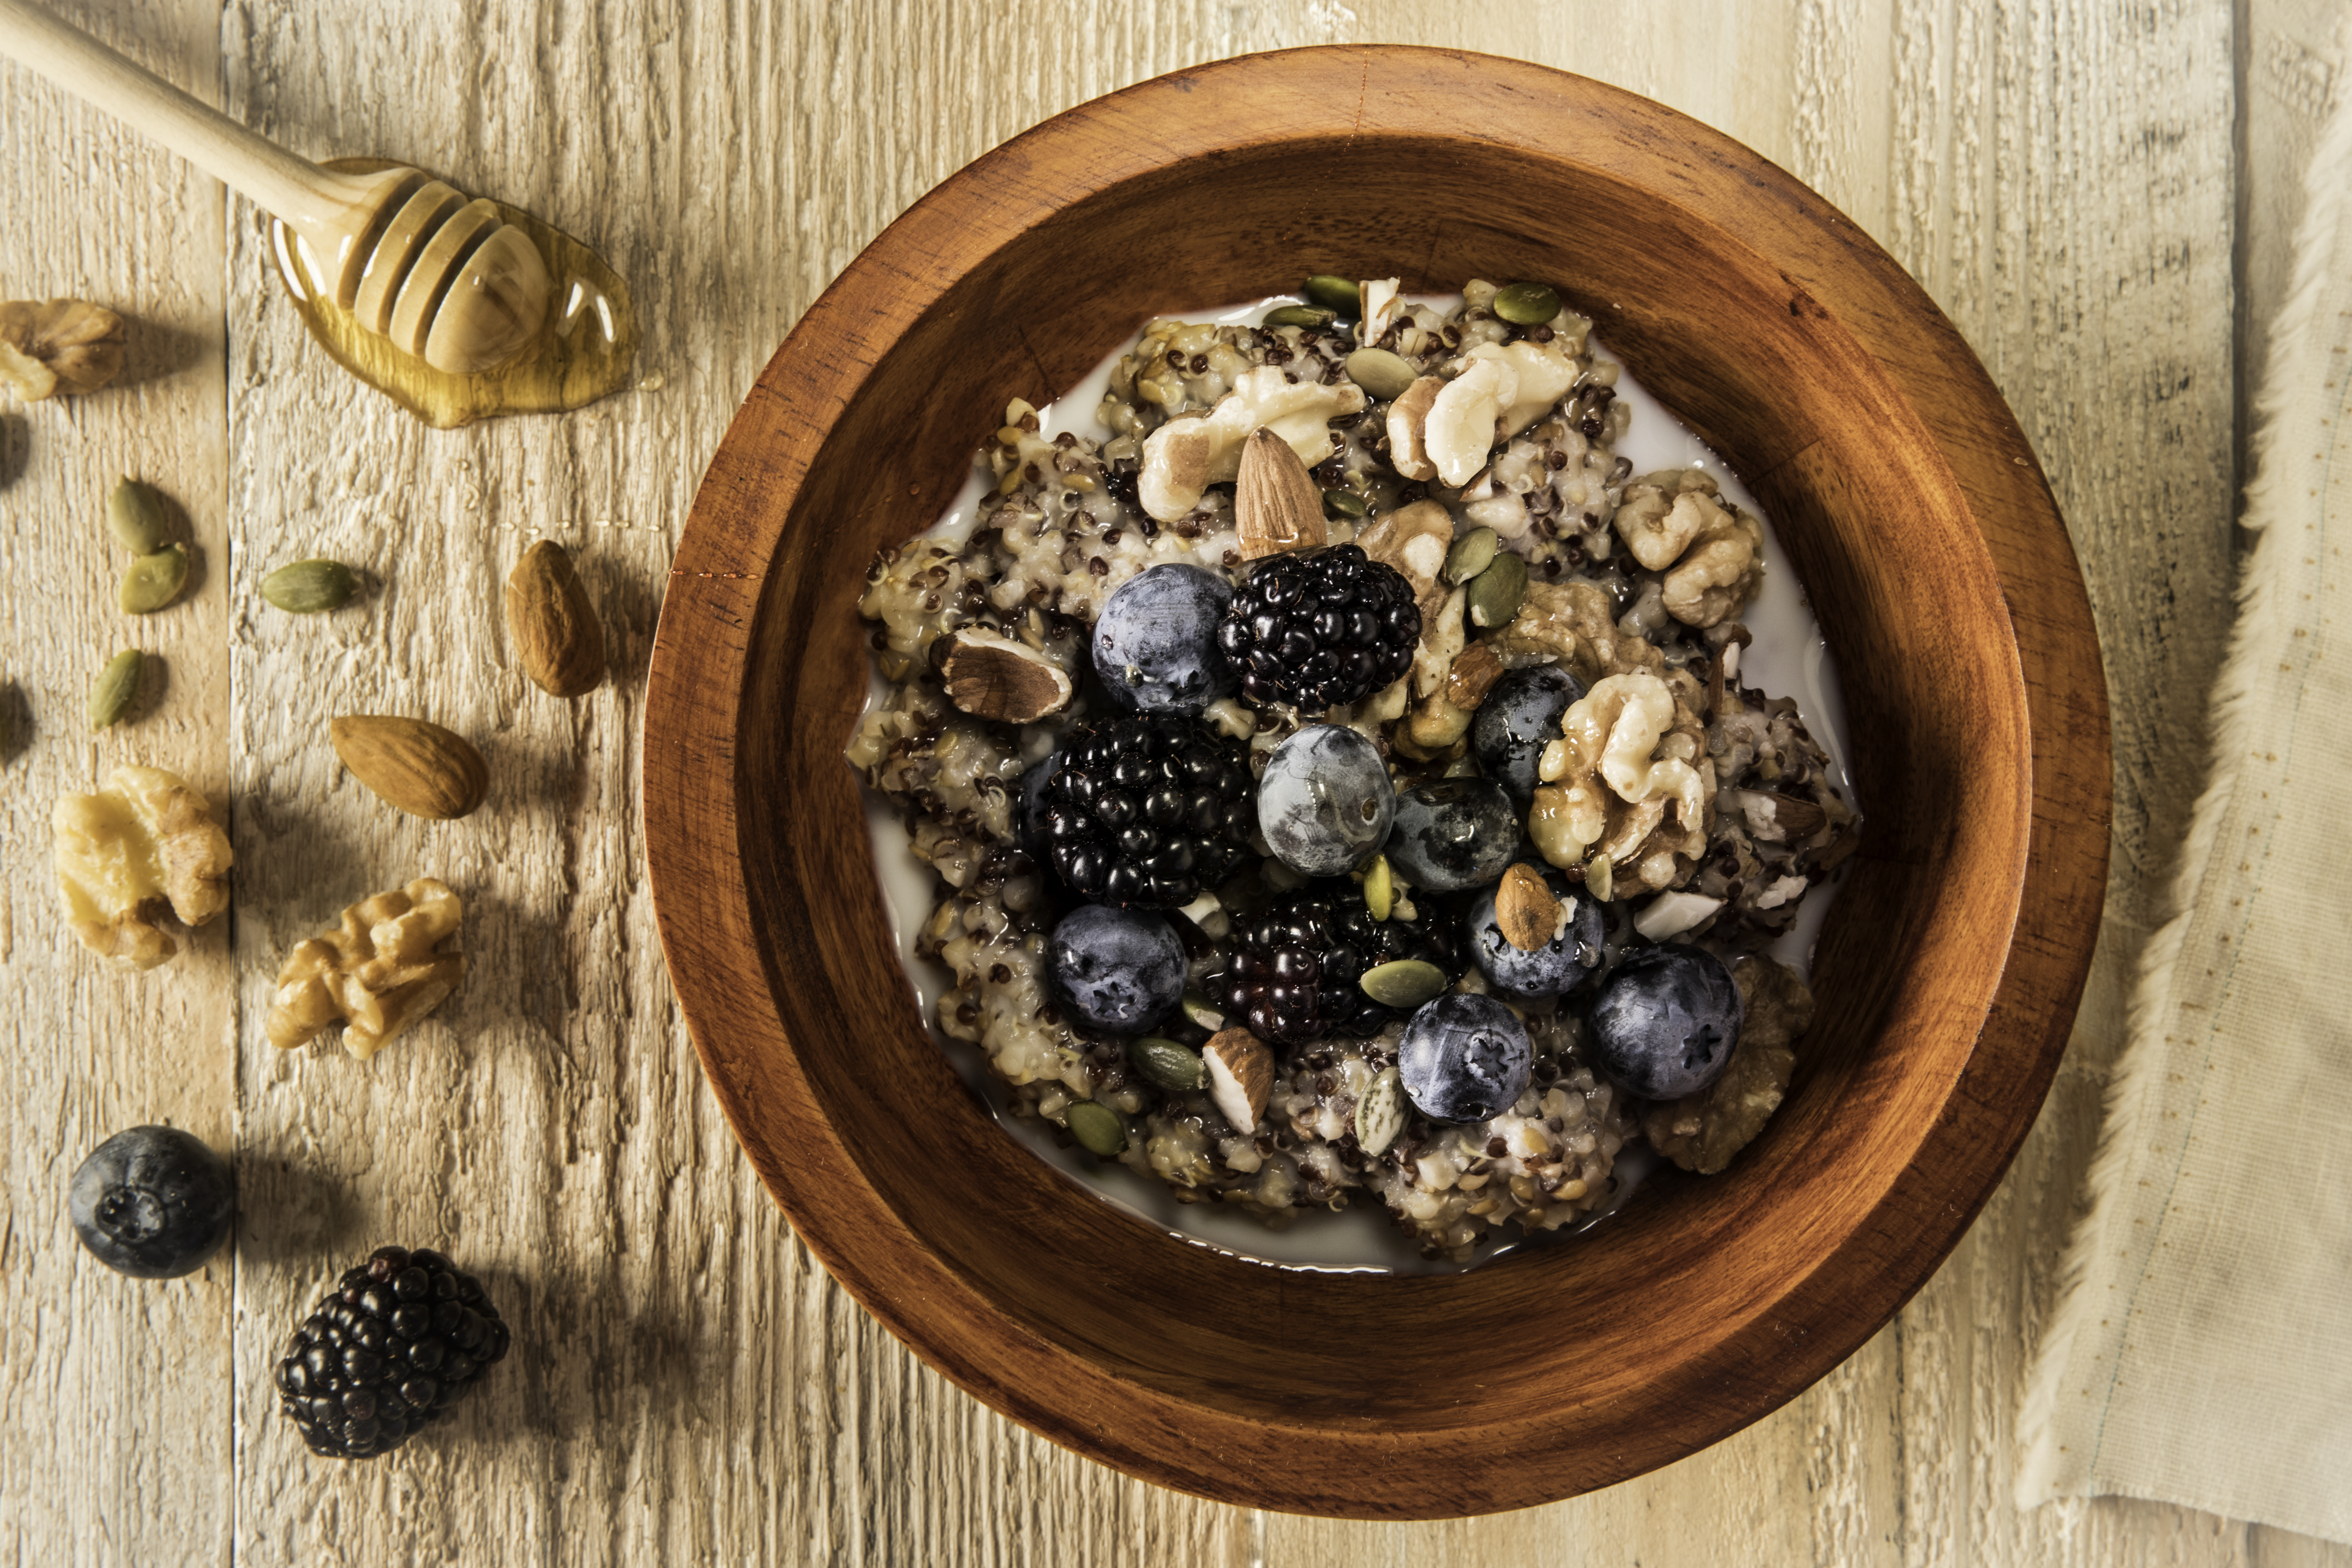 Ancient Grain Oatmeal Bowl//Photo by Lance Mellenbruch//The Food Channel